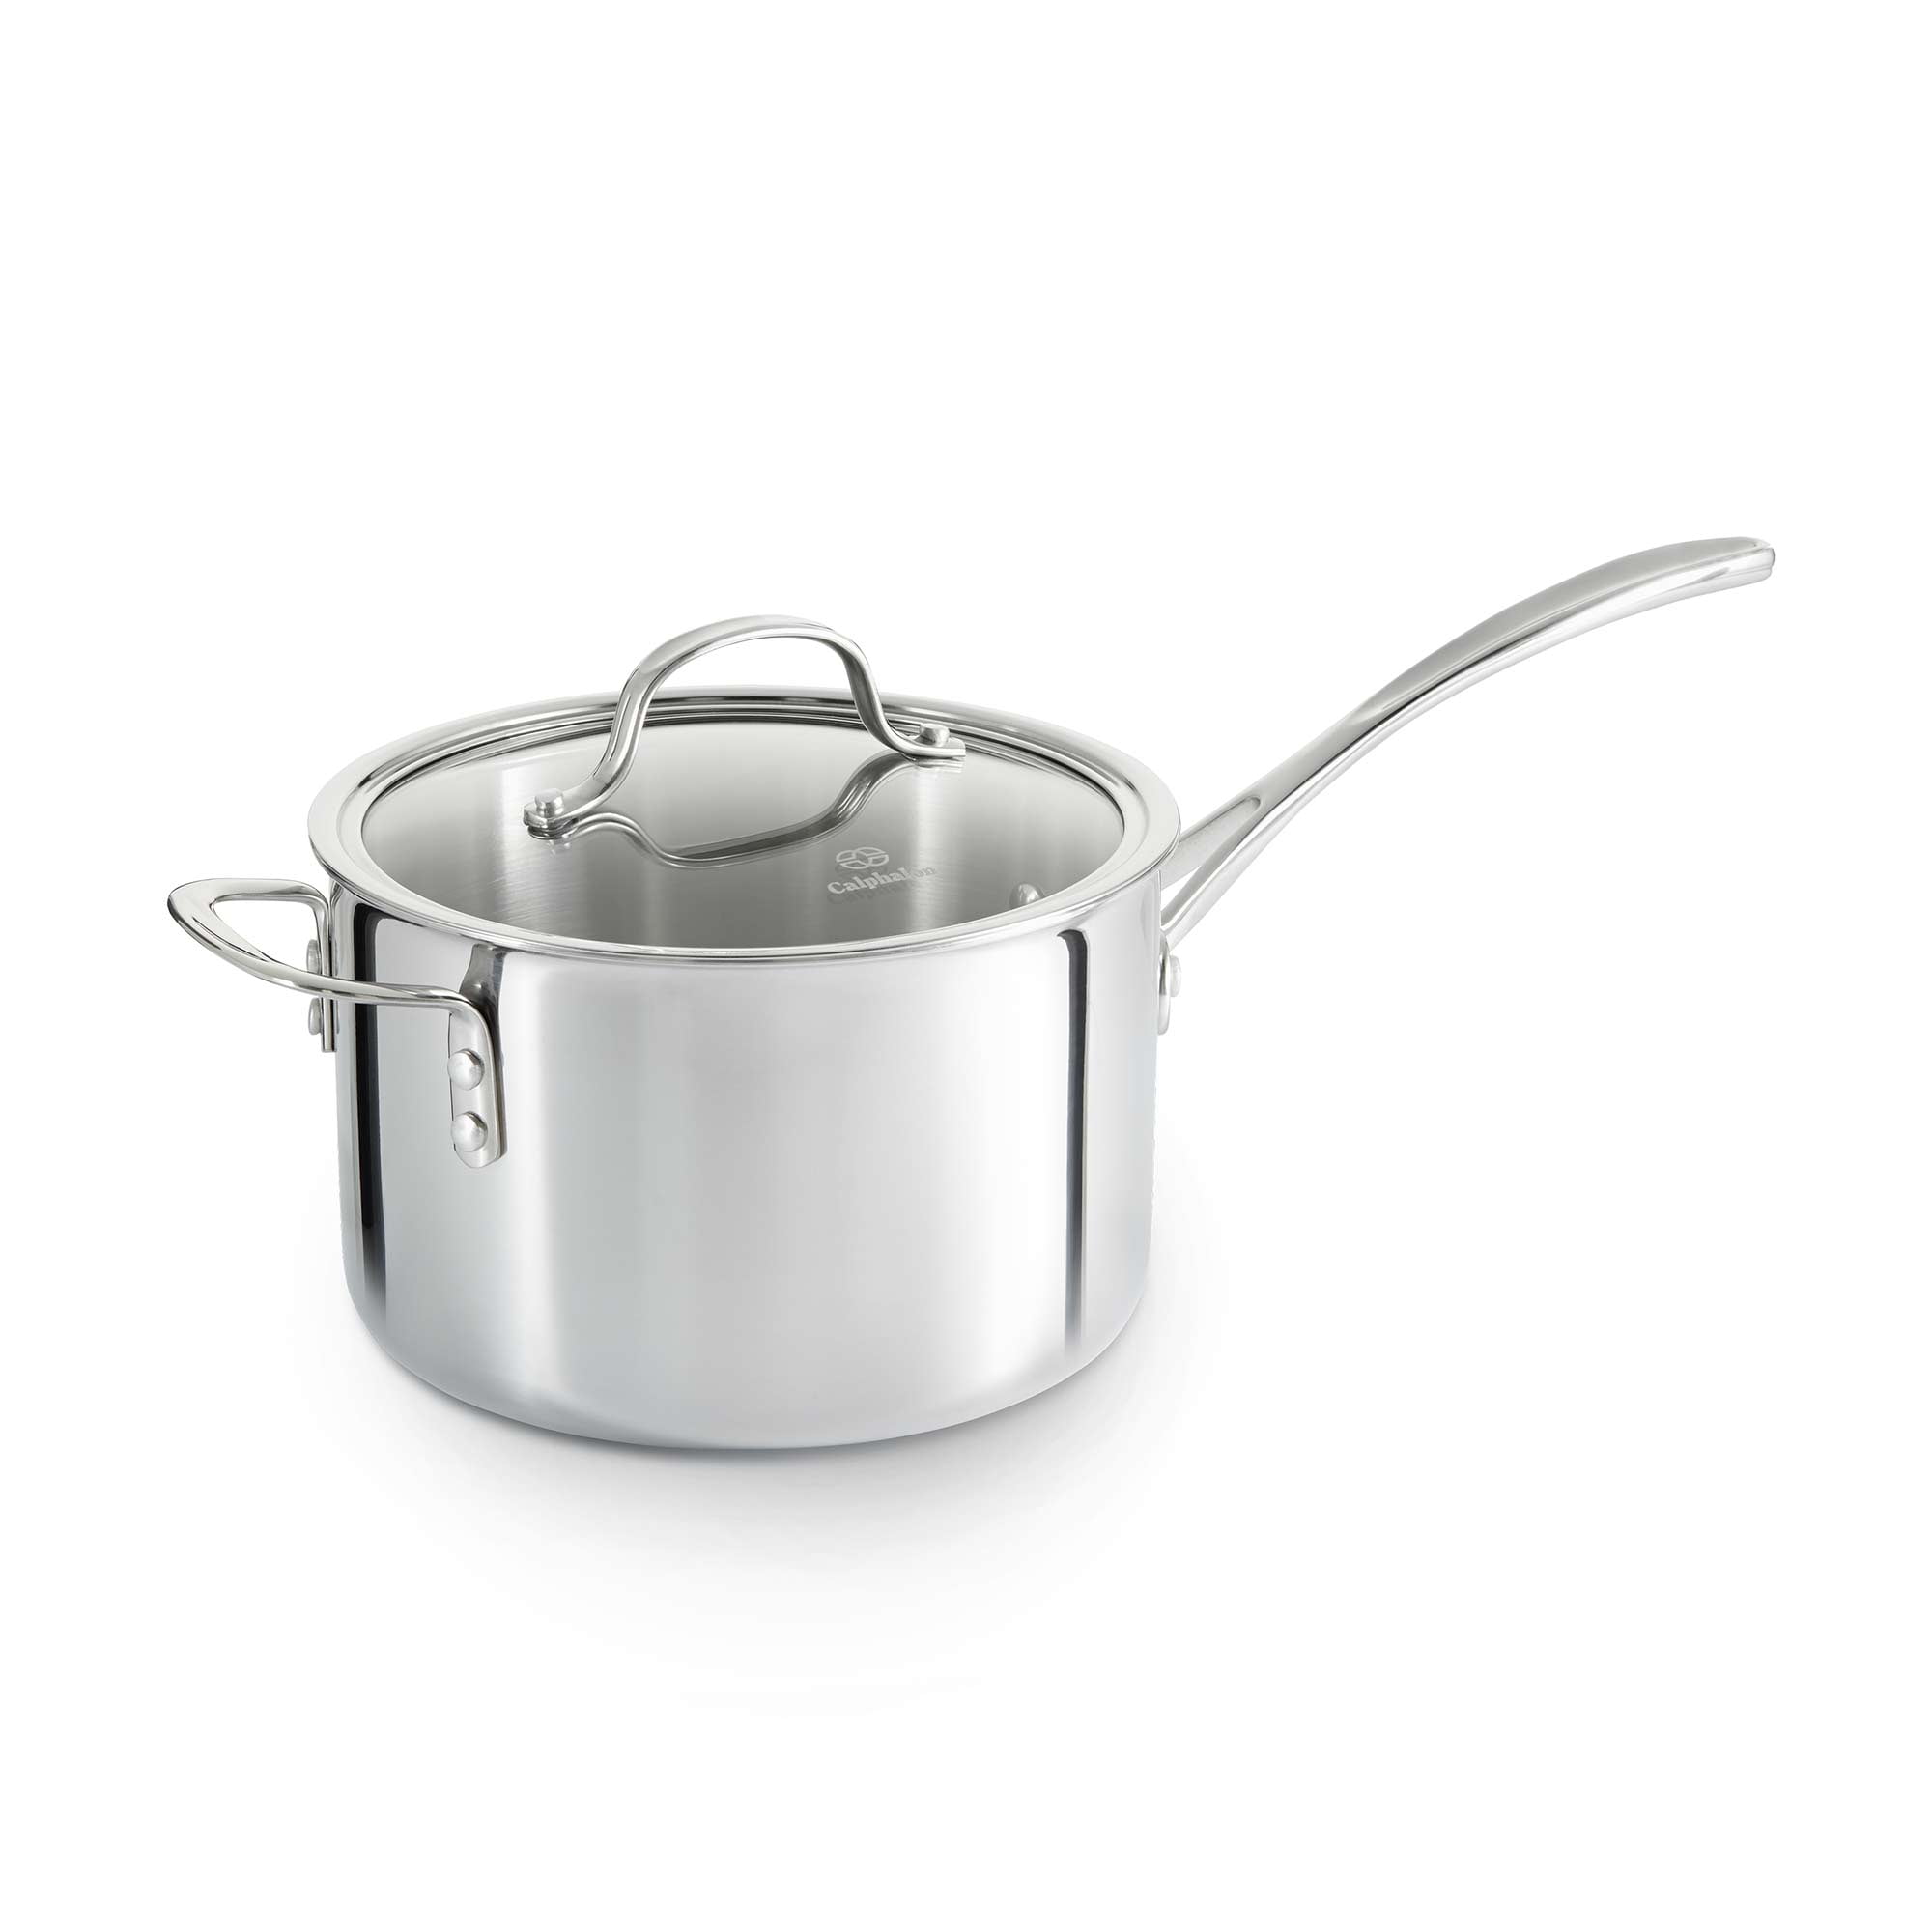 Calphalon Tri-Ply Stainless Steel 4.5-Quart Saucepan with Cover 